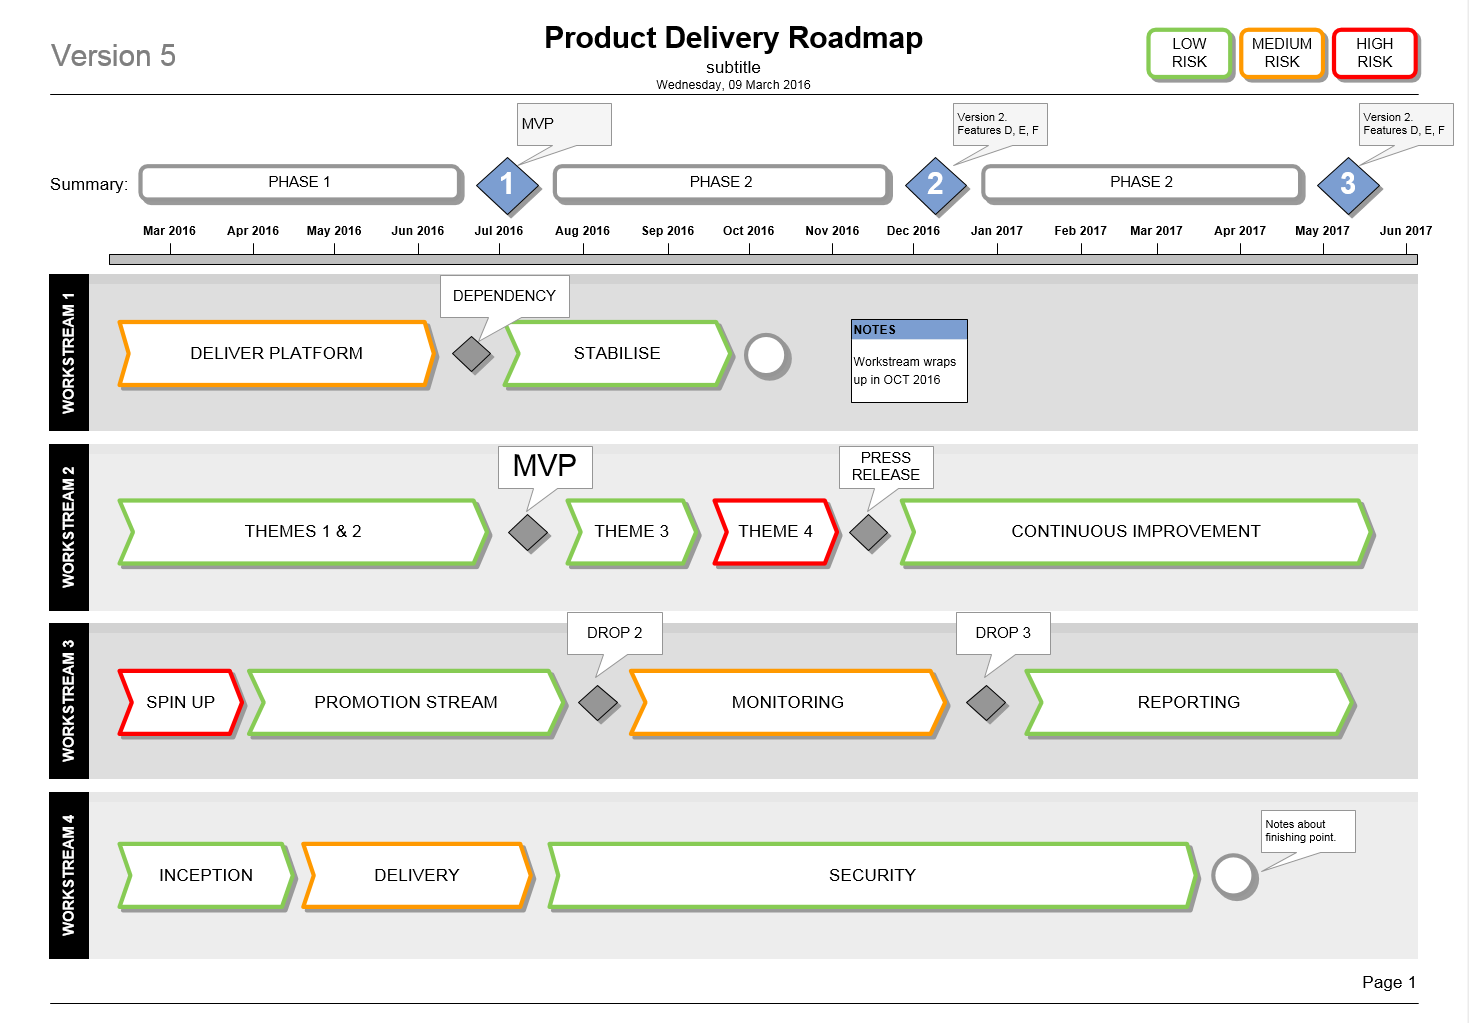 Product Delivery Plan Roadmap Template (Visio)